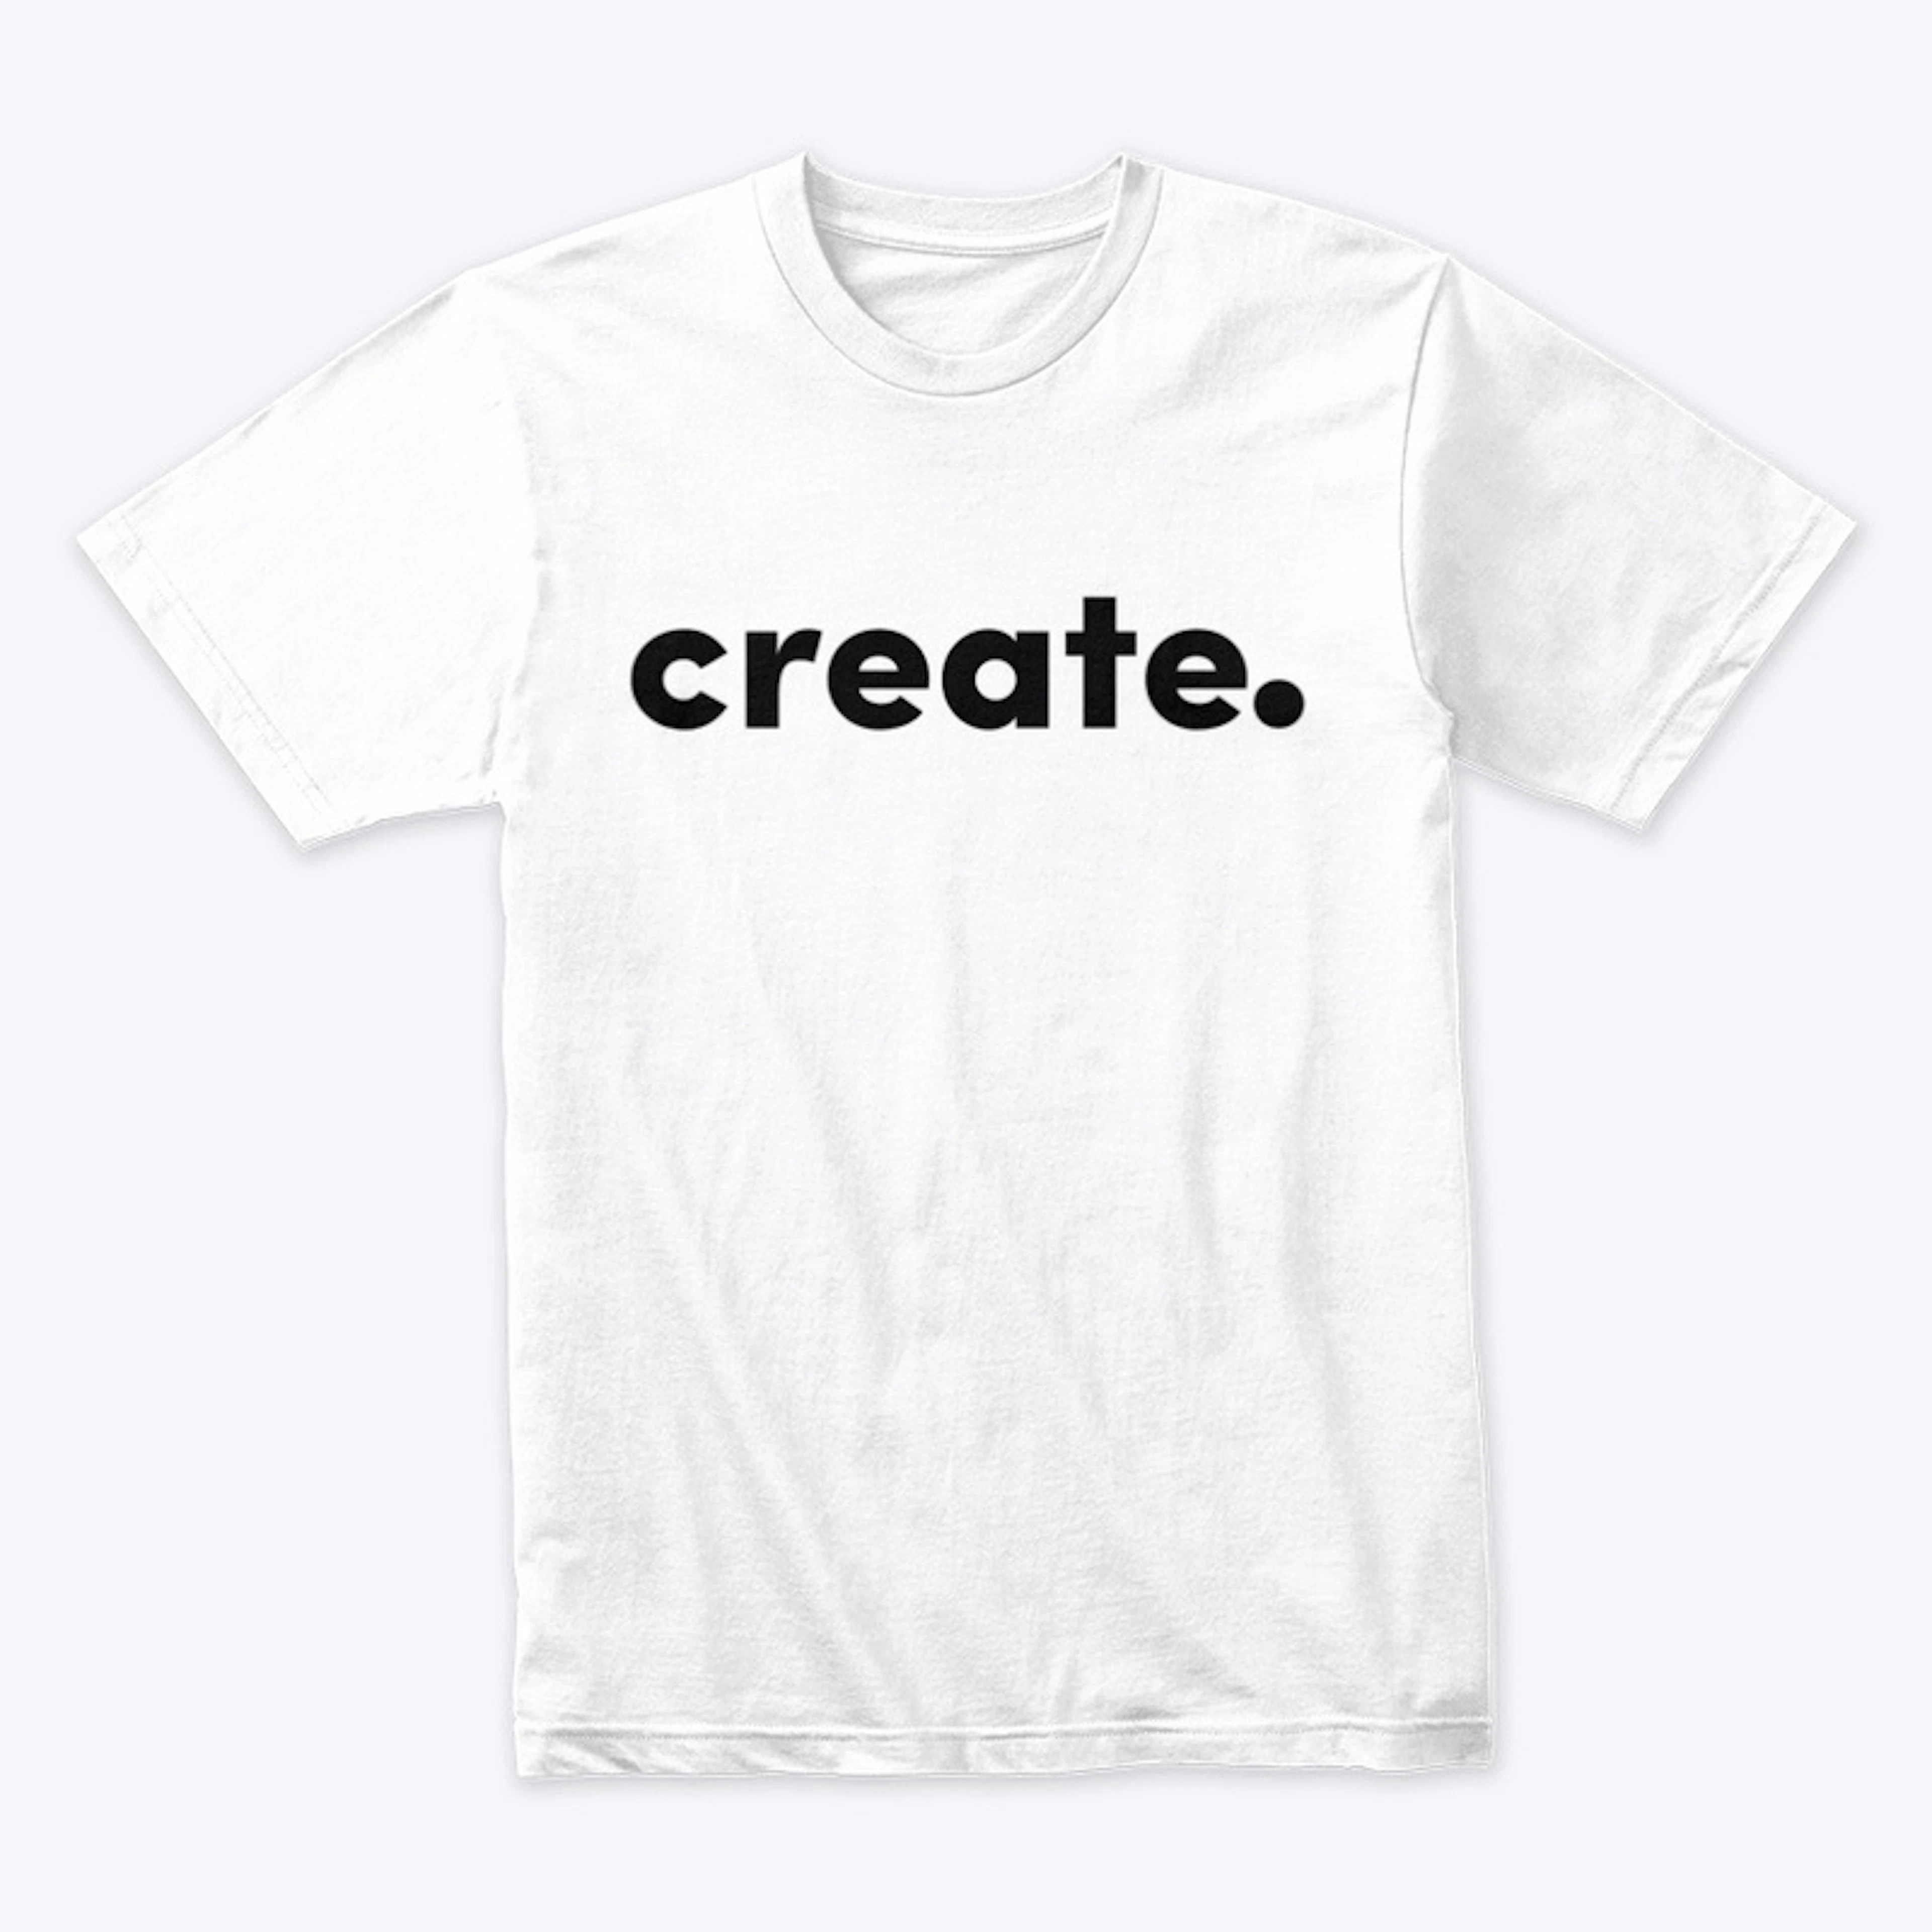 CREATE. Collection 